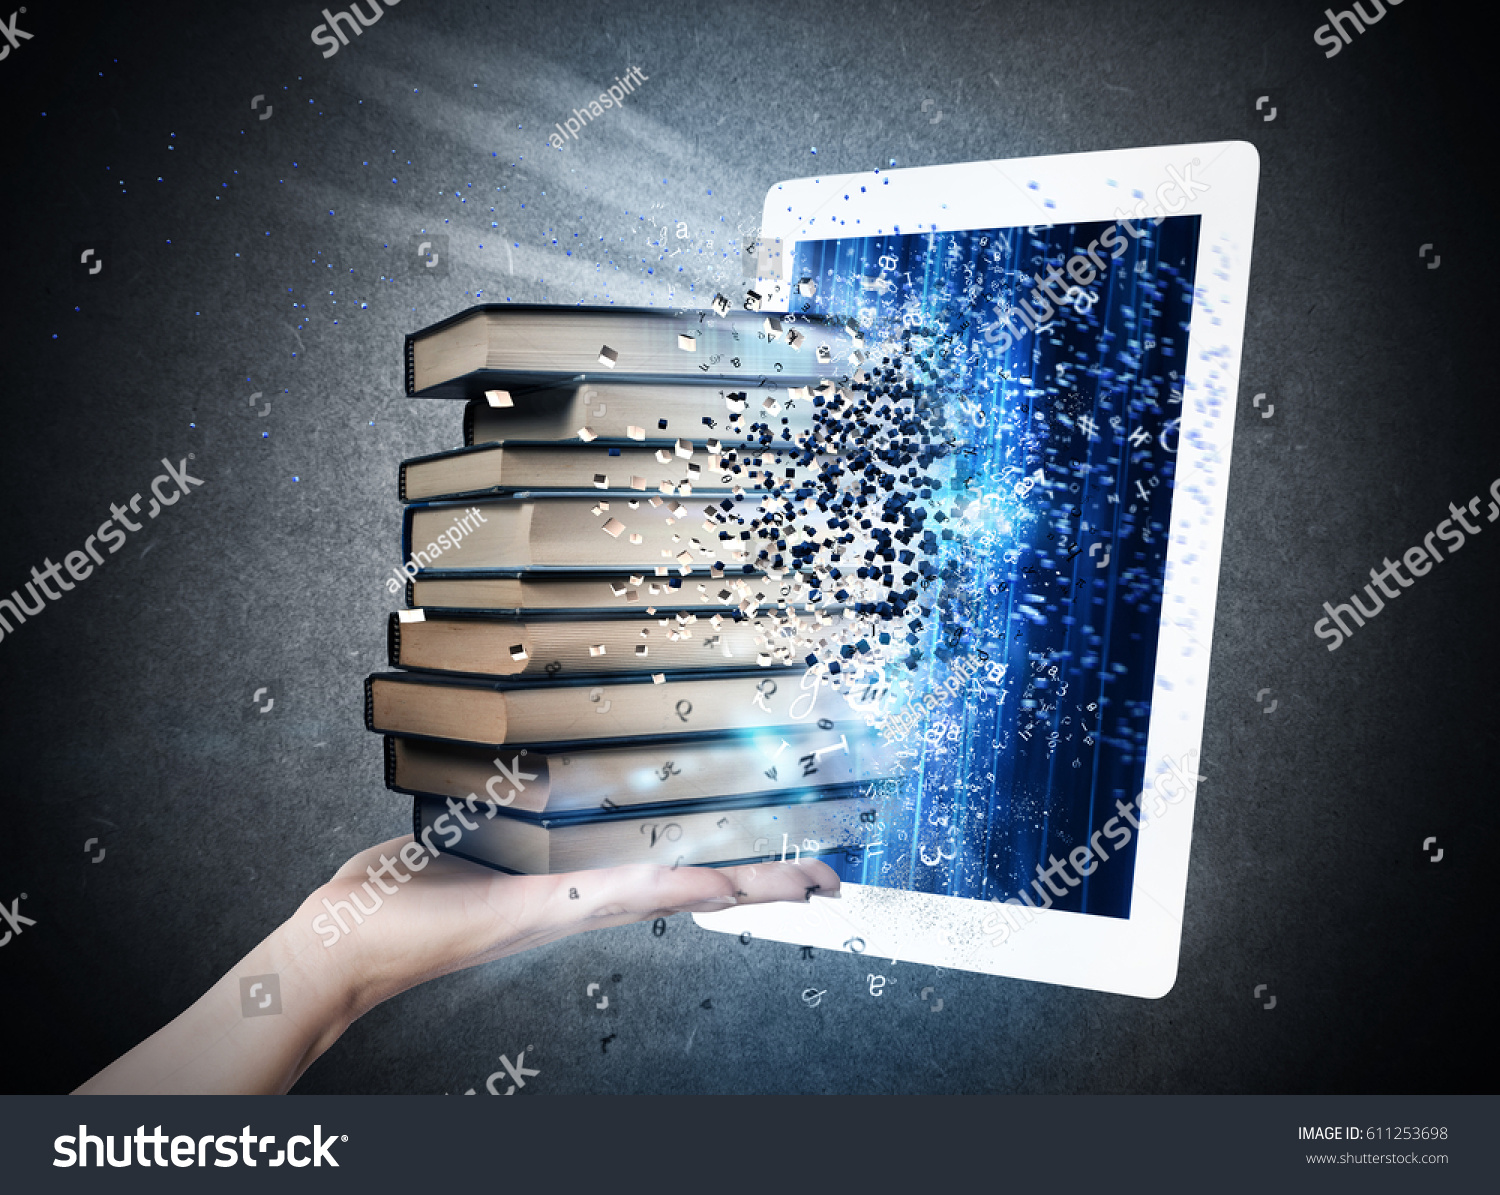 Reading books with an E-book #611253698